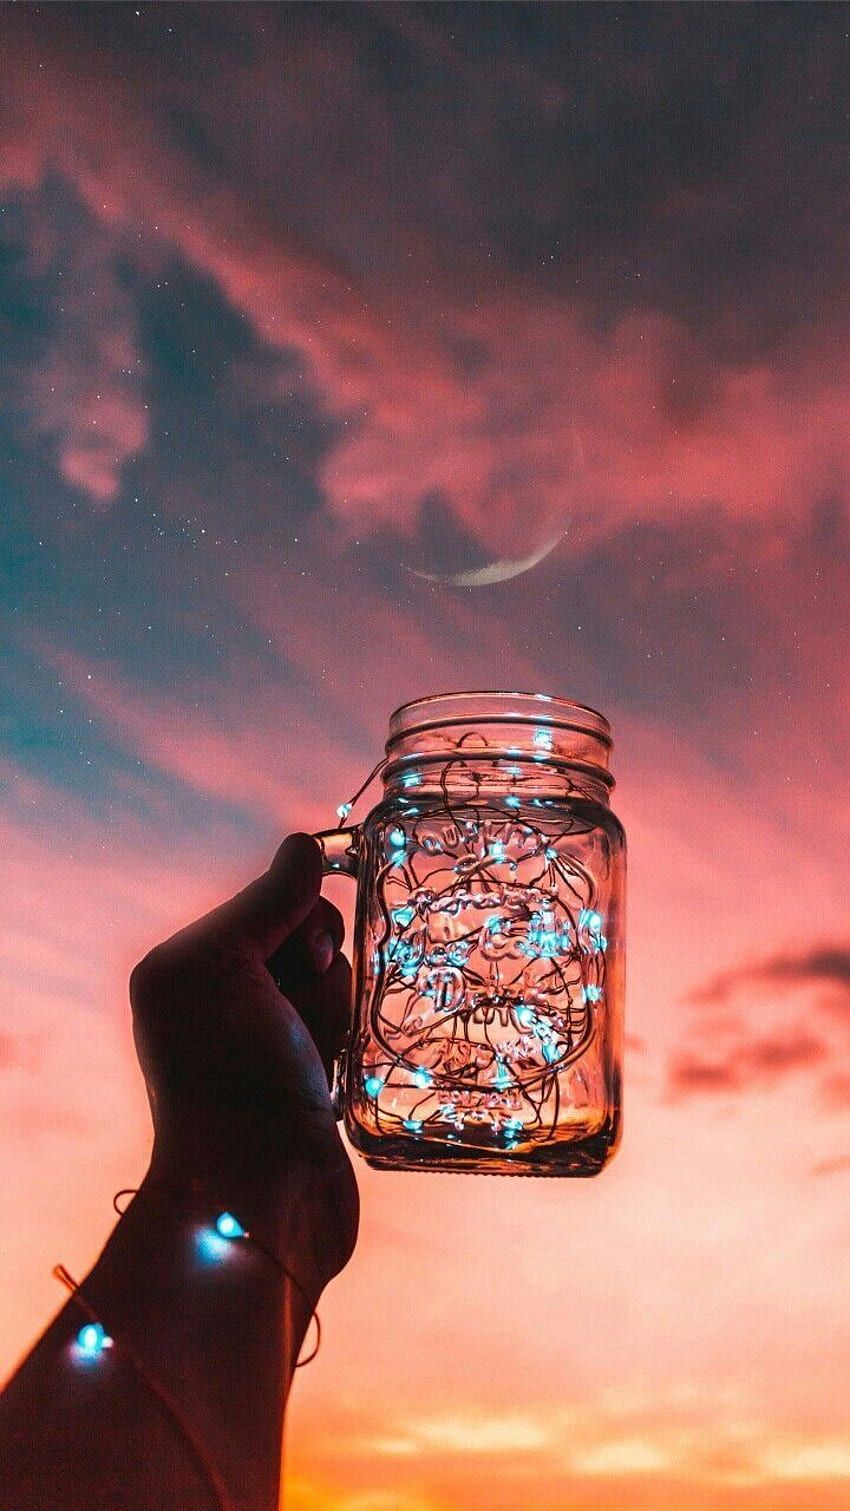 A hand holding a jar with lights in it against a sunset sky - Fairy lights